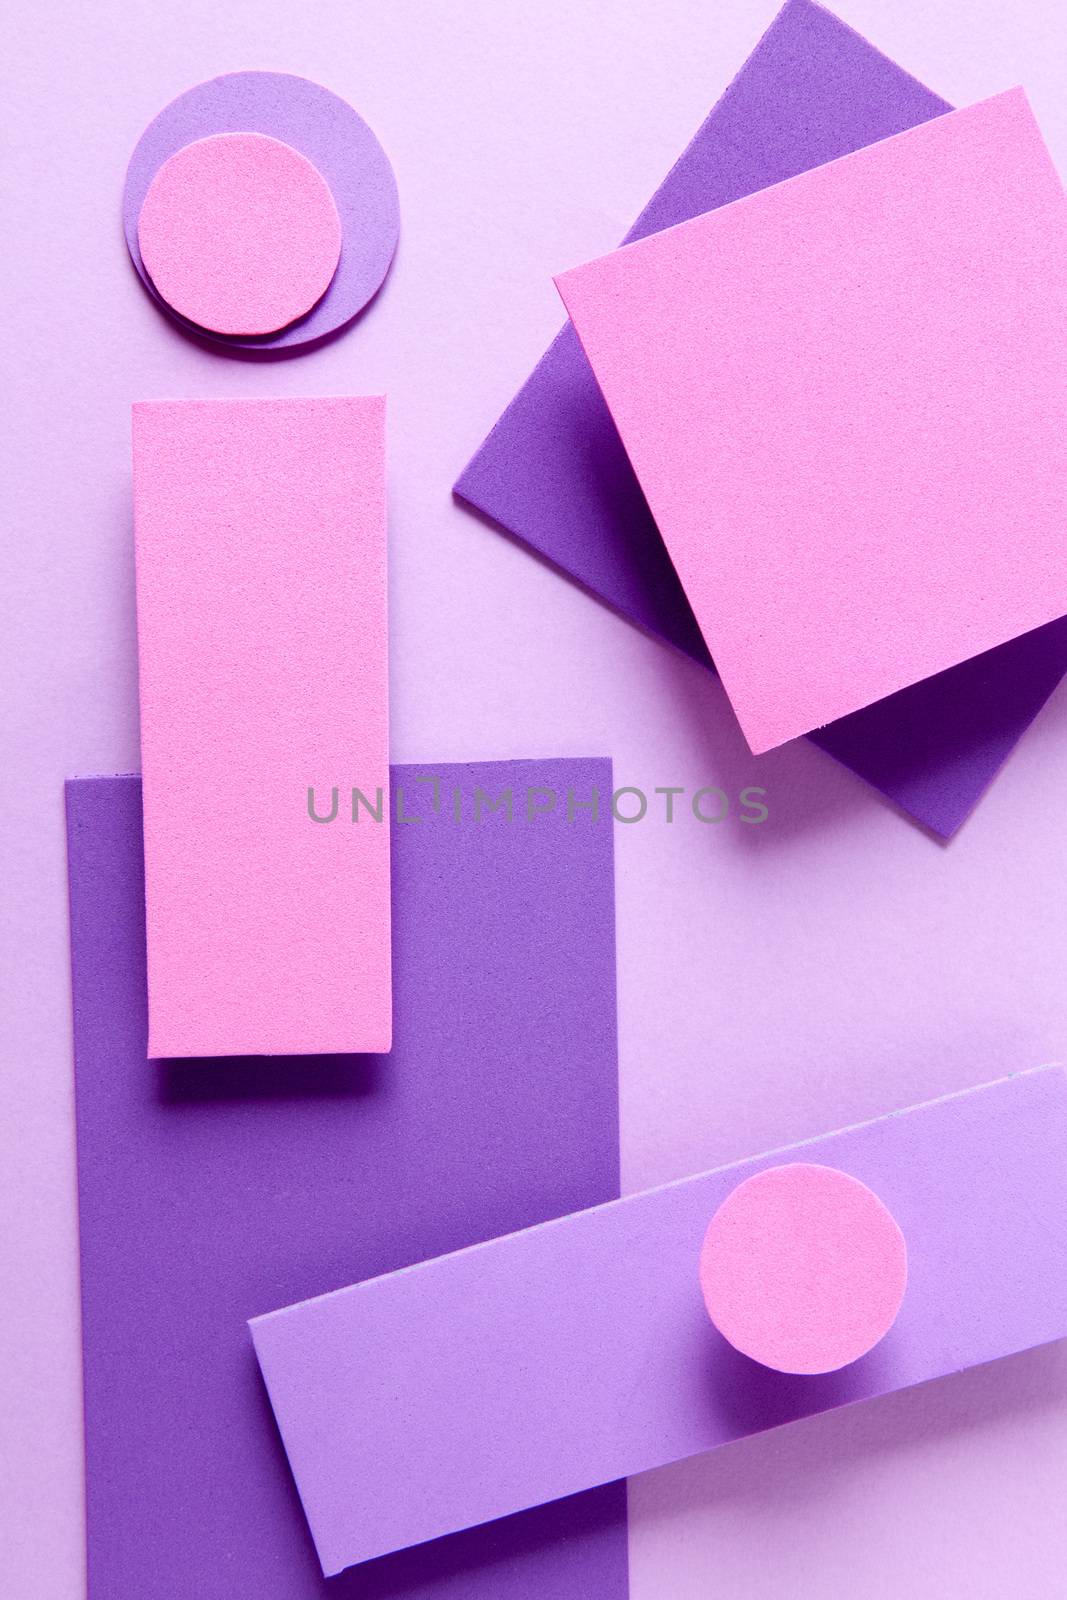 Material design colorful background by andongob